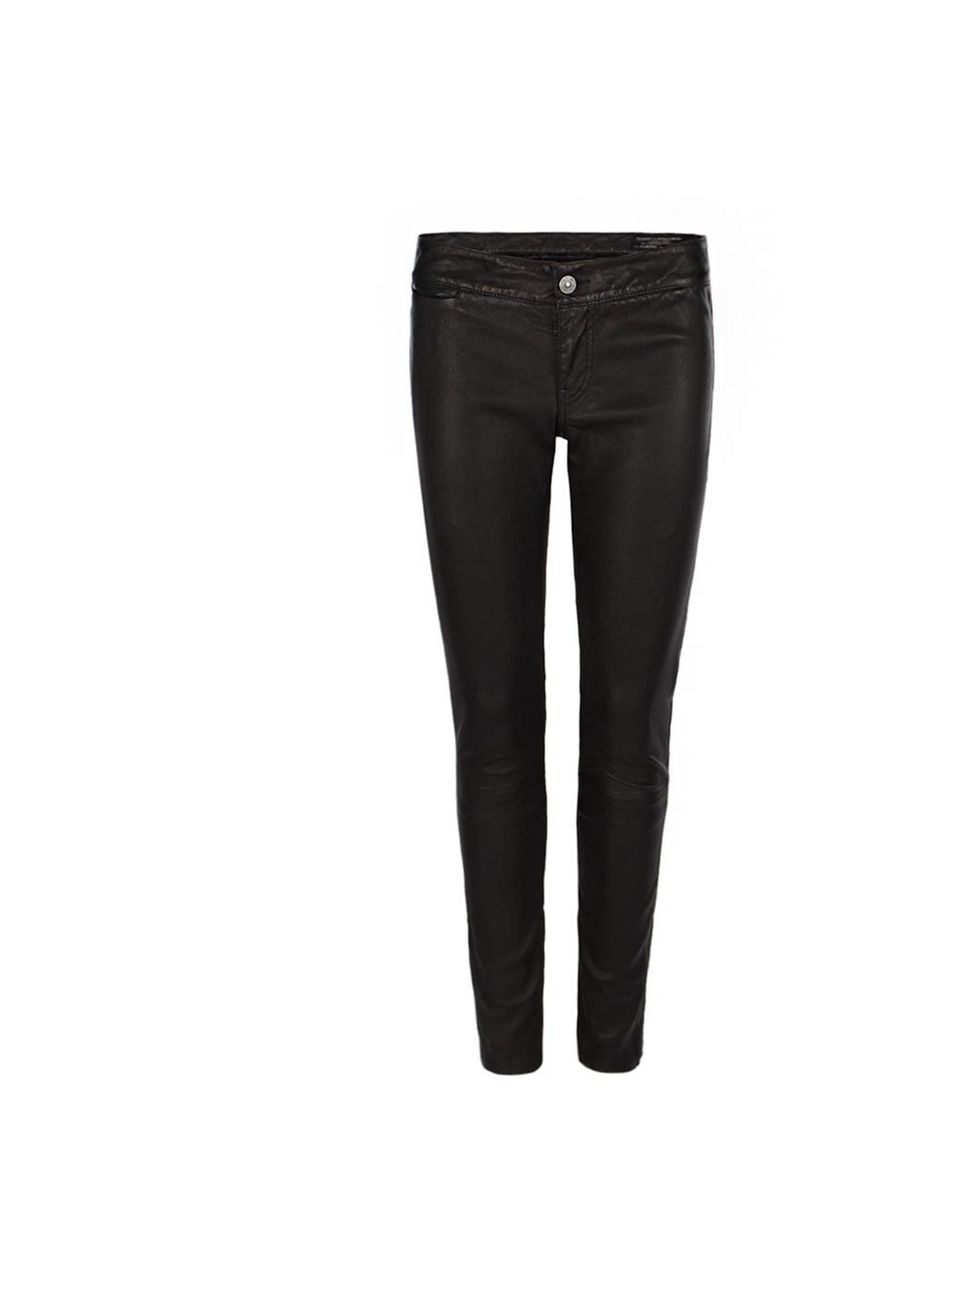 <p>All Saints 'Elben' cropped leather trousers, £395, for stockists call 0844 980 2211</p>